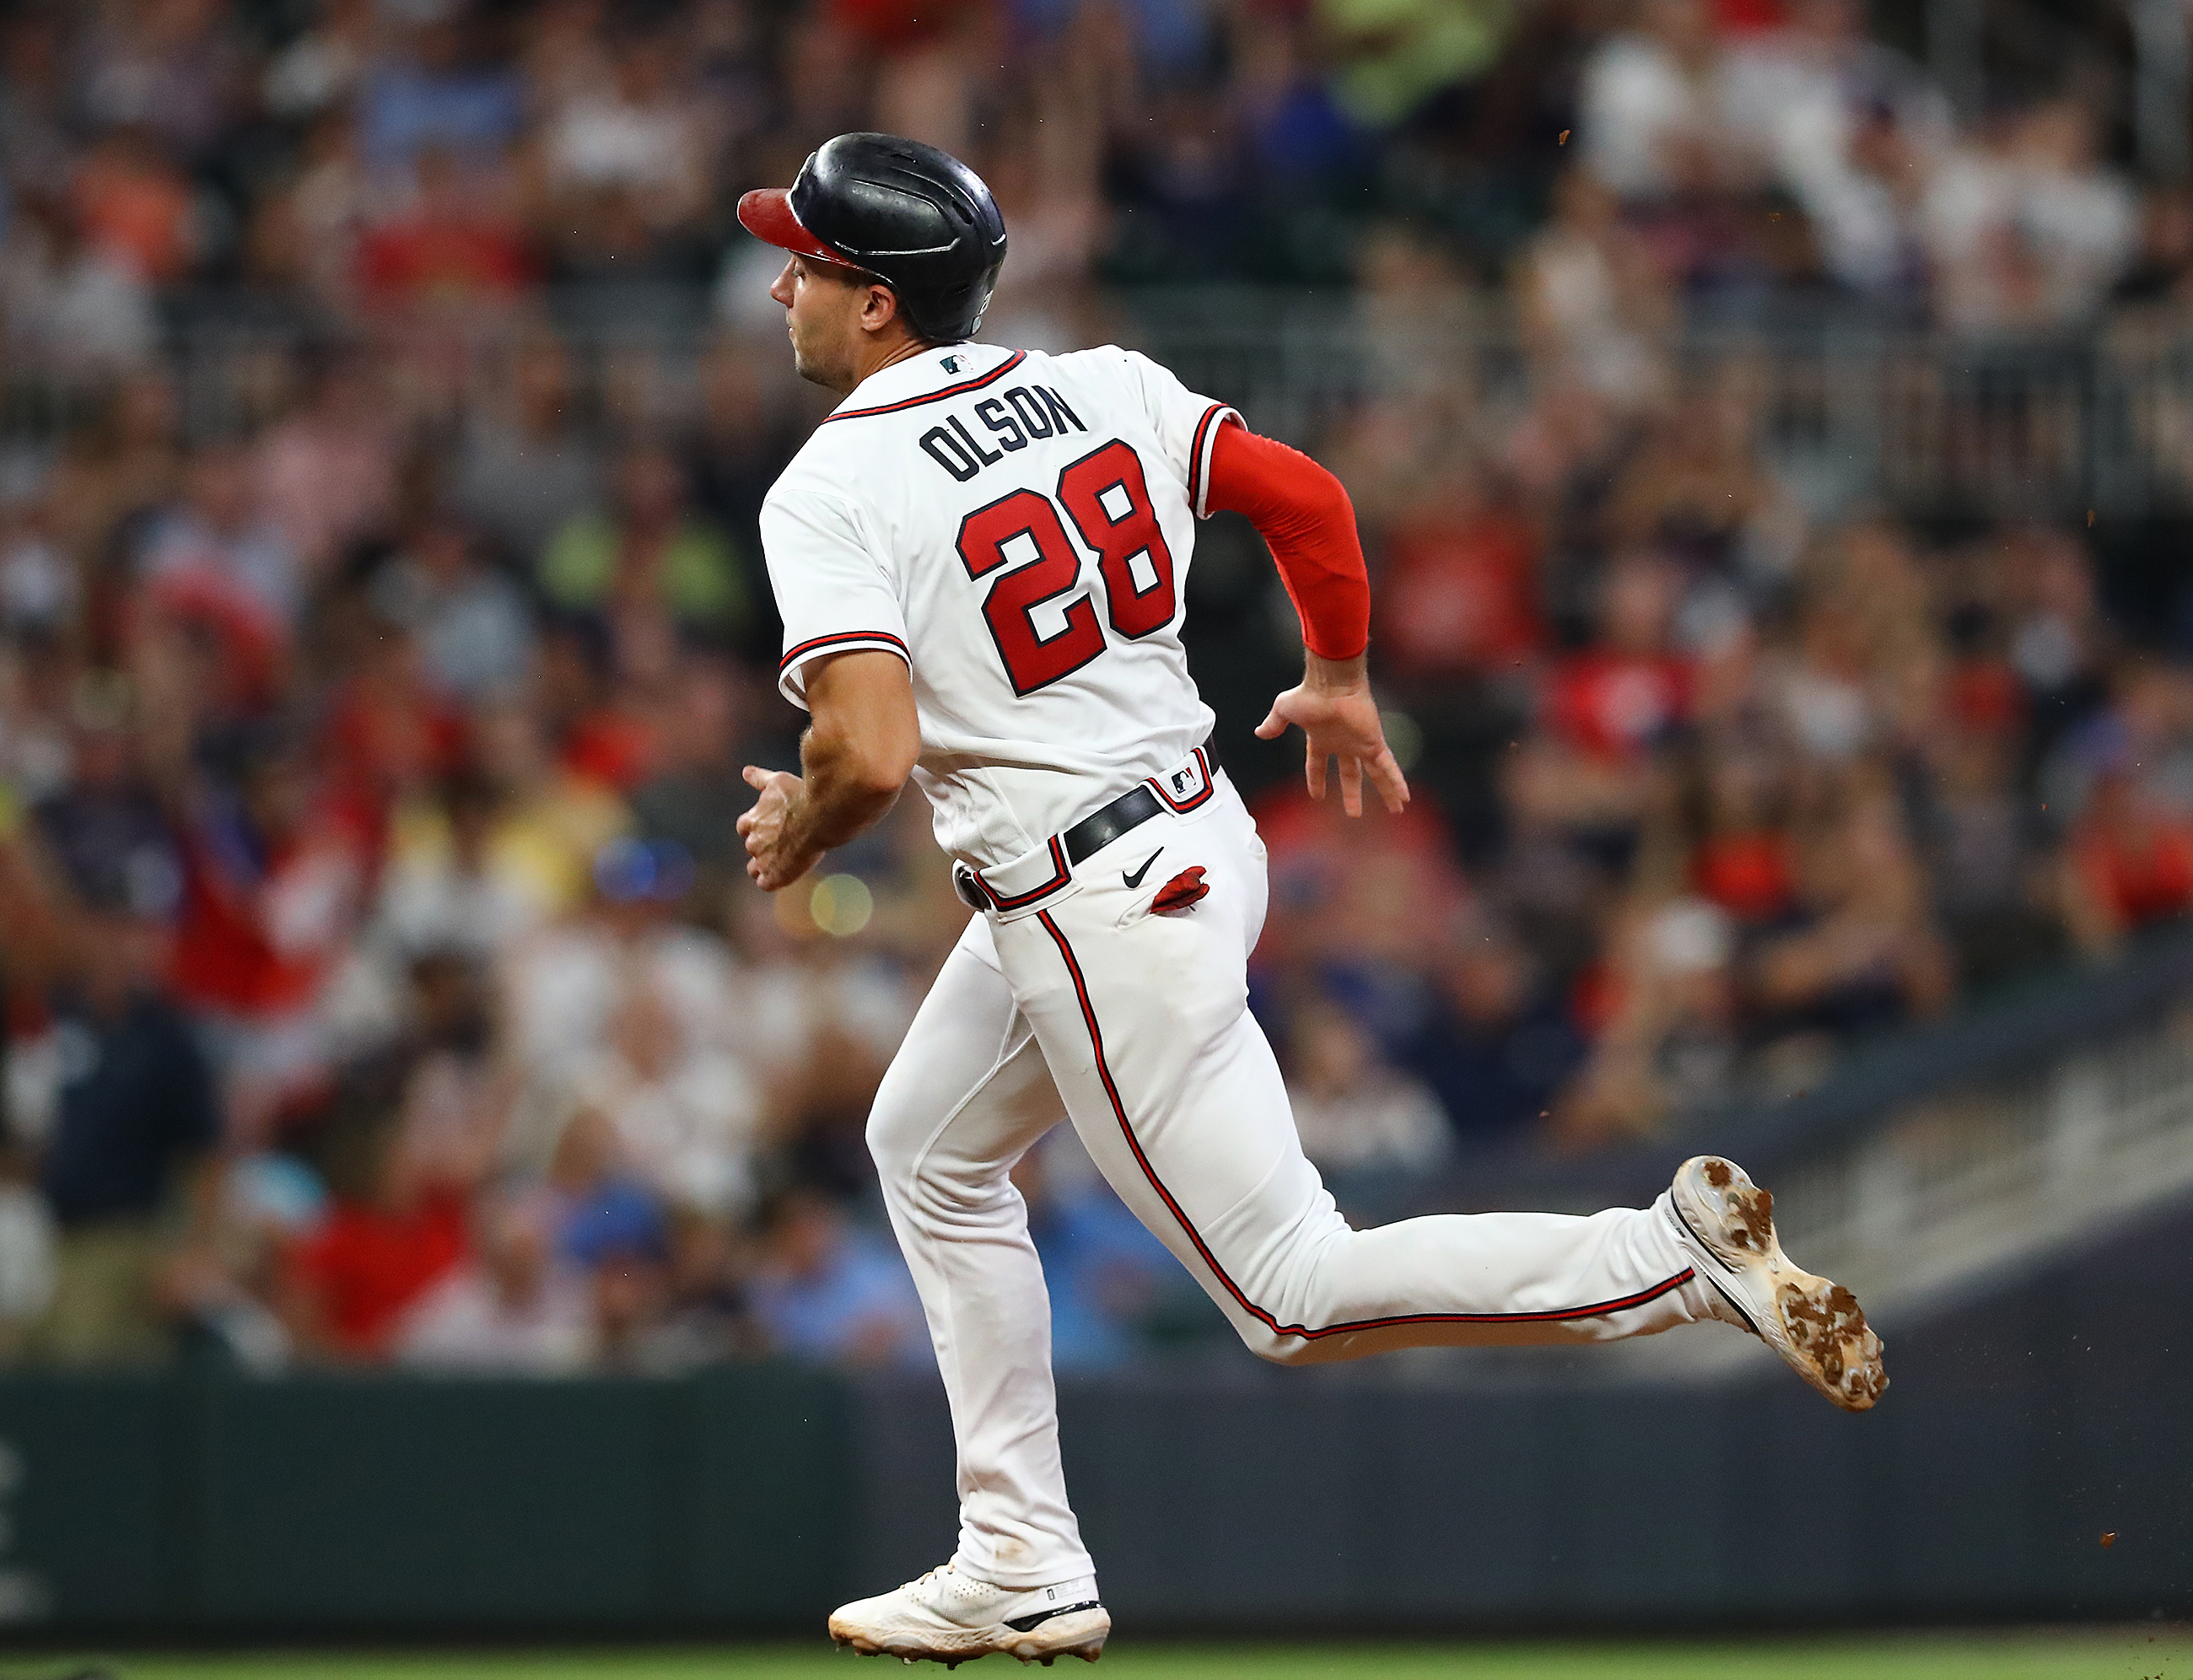 Dansby Swanson amplifies big World Series moment with classic interview  National News - Bally Sports